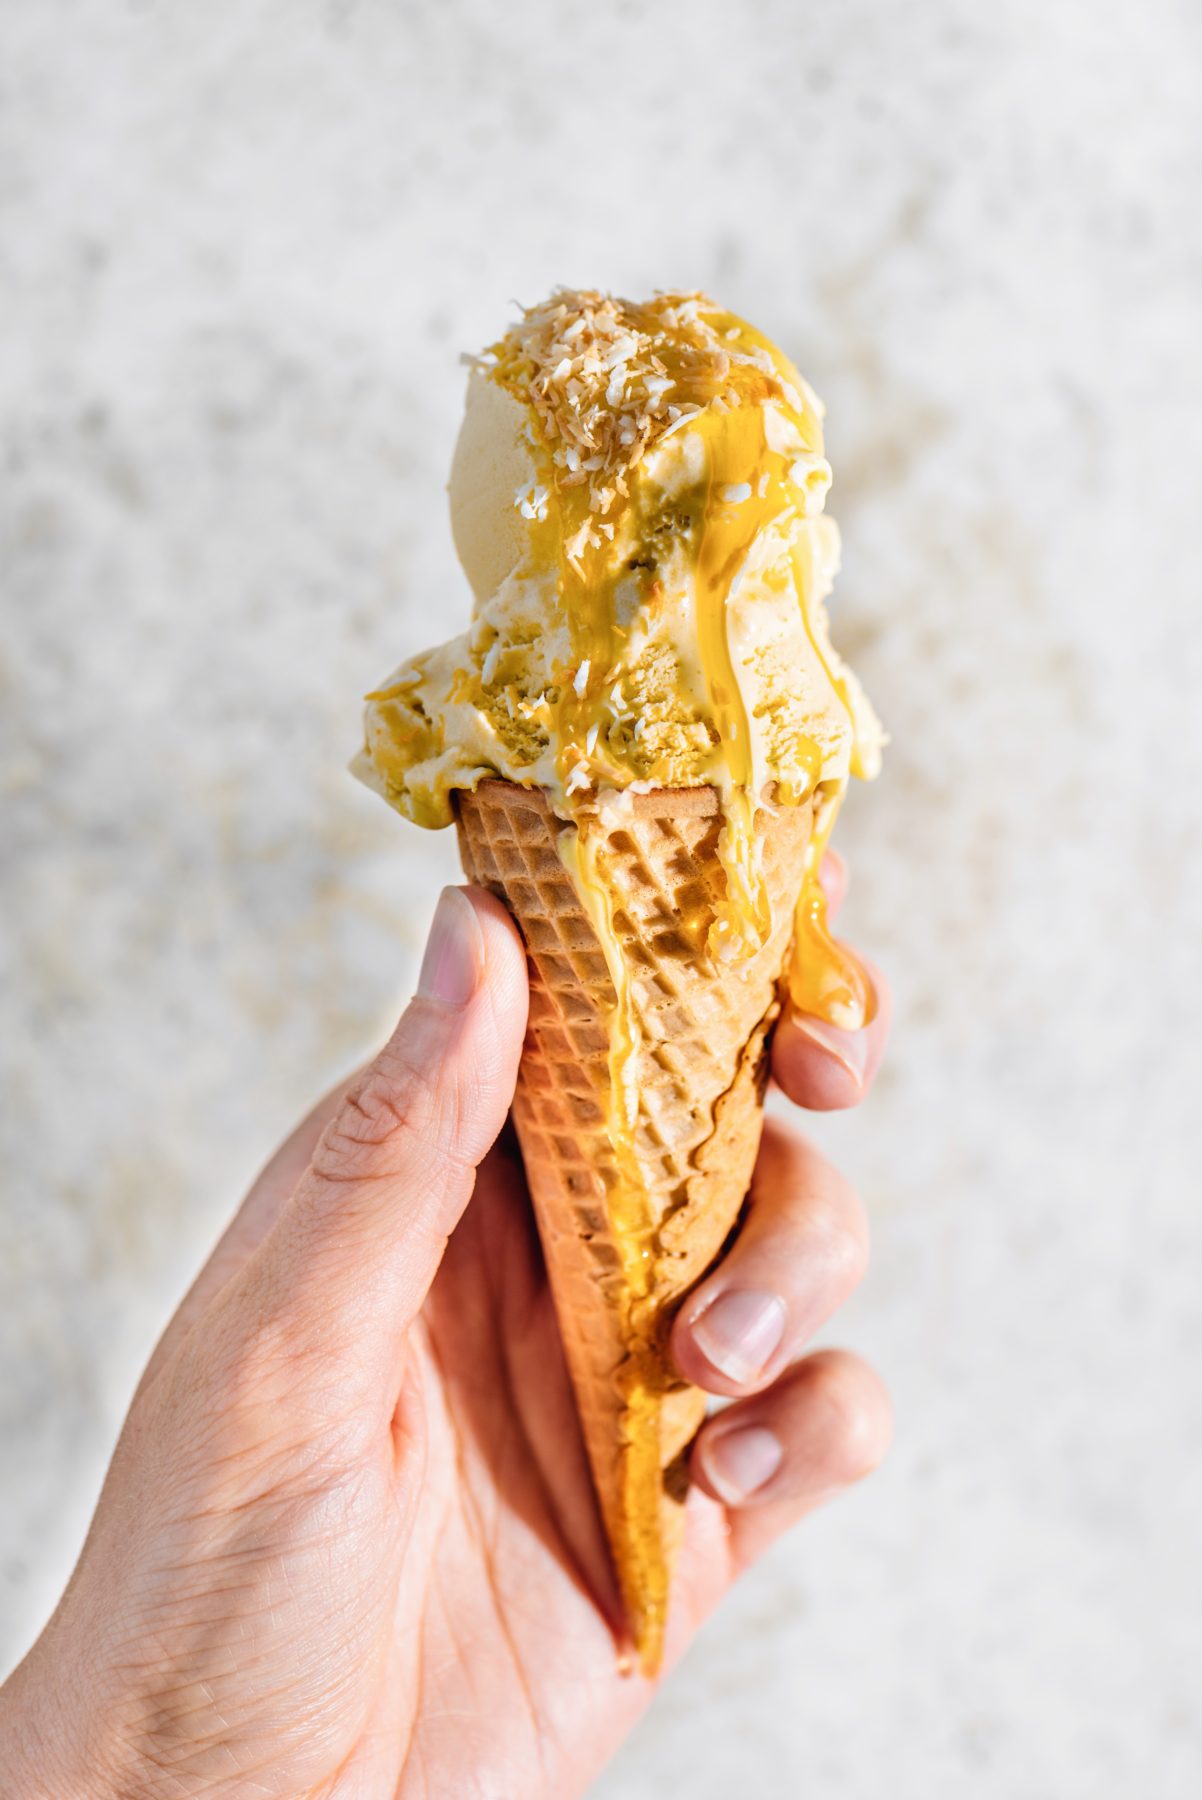 Vegan Lemon Coconut Ice Cream with waffle cone, held in a hand